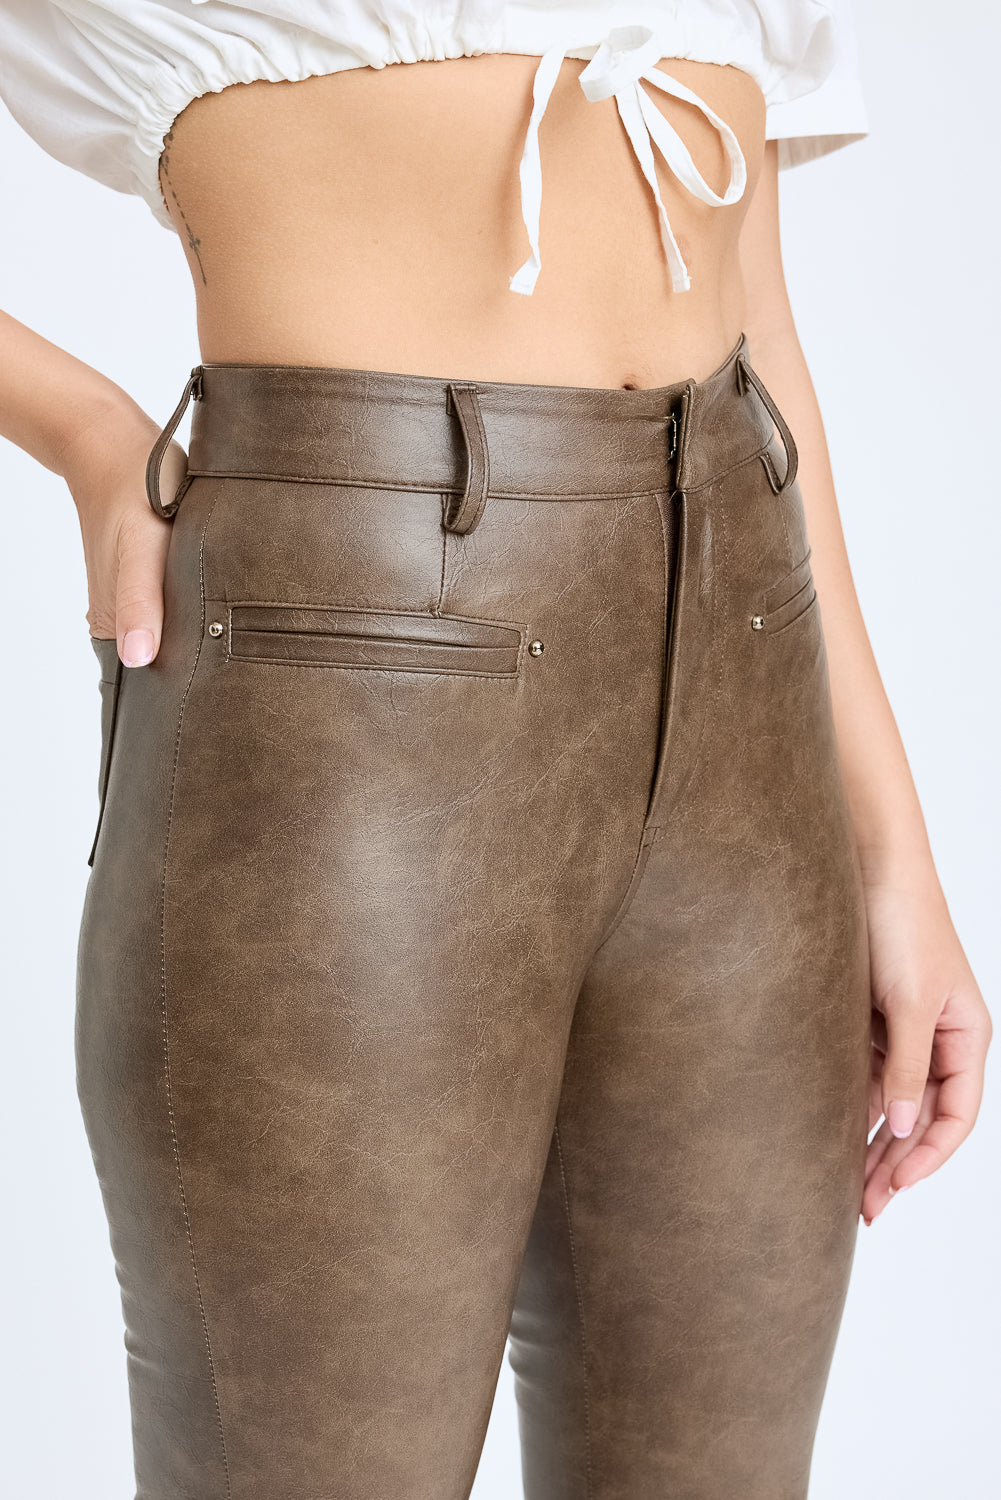 SAND BOOTCUT WIDE TROUSER